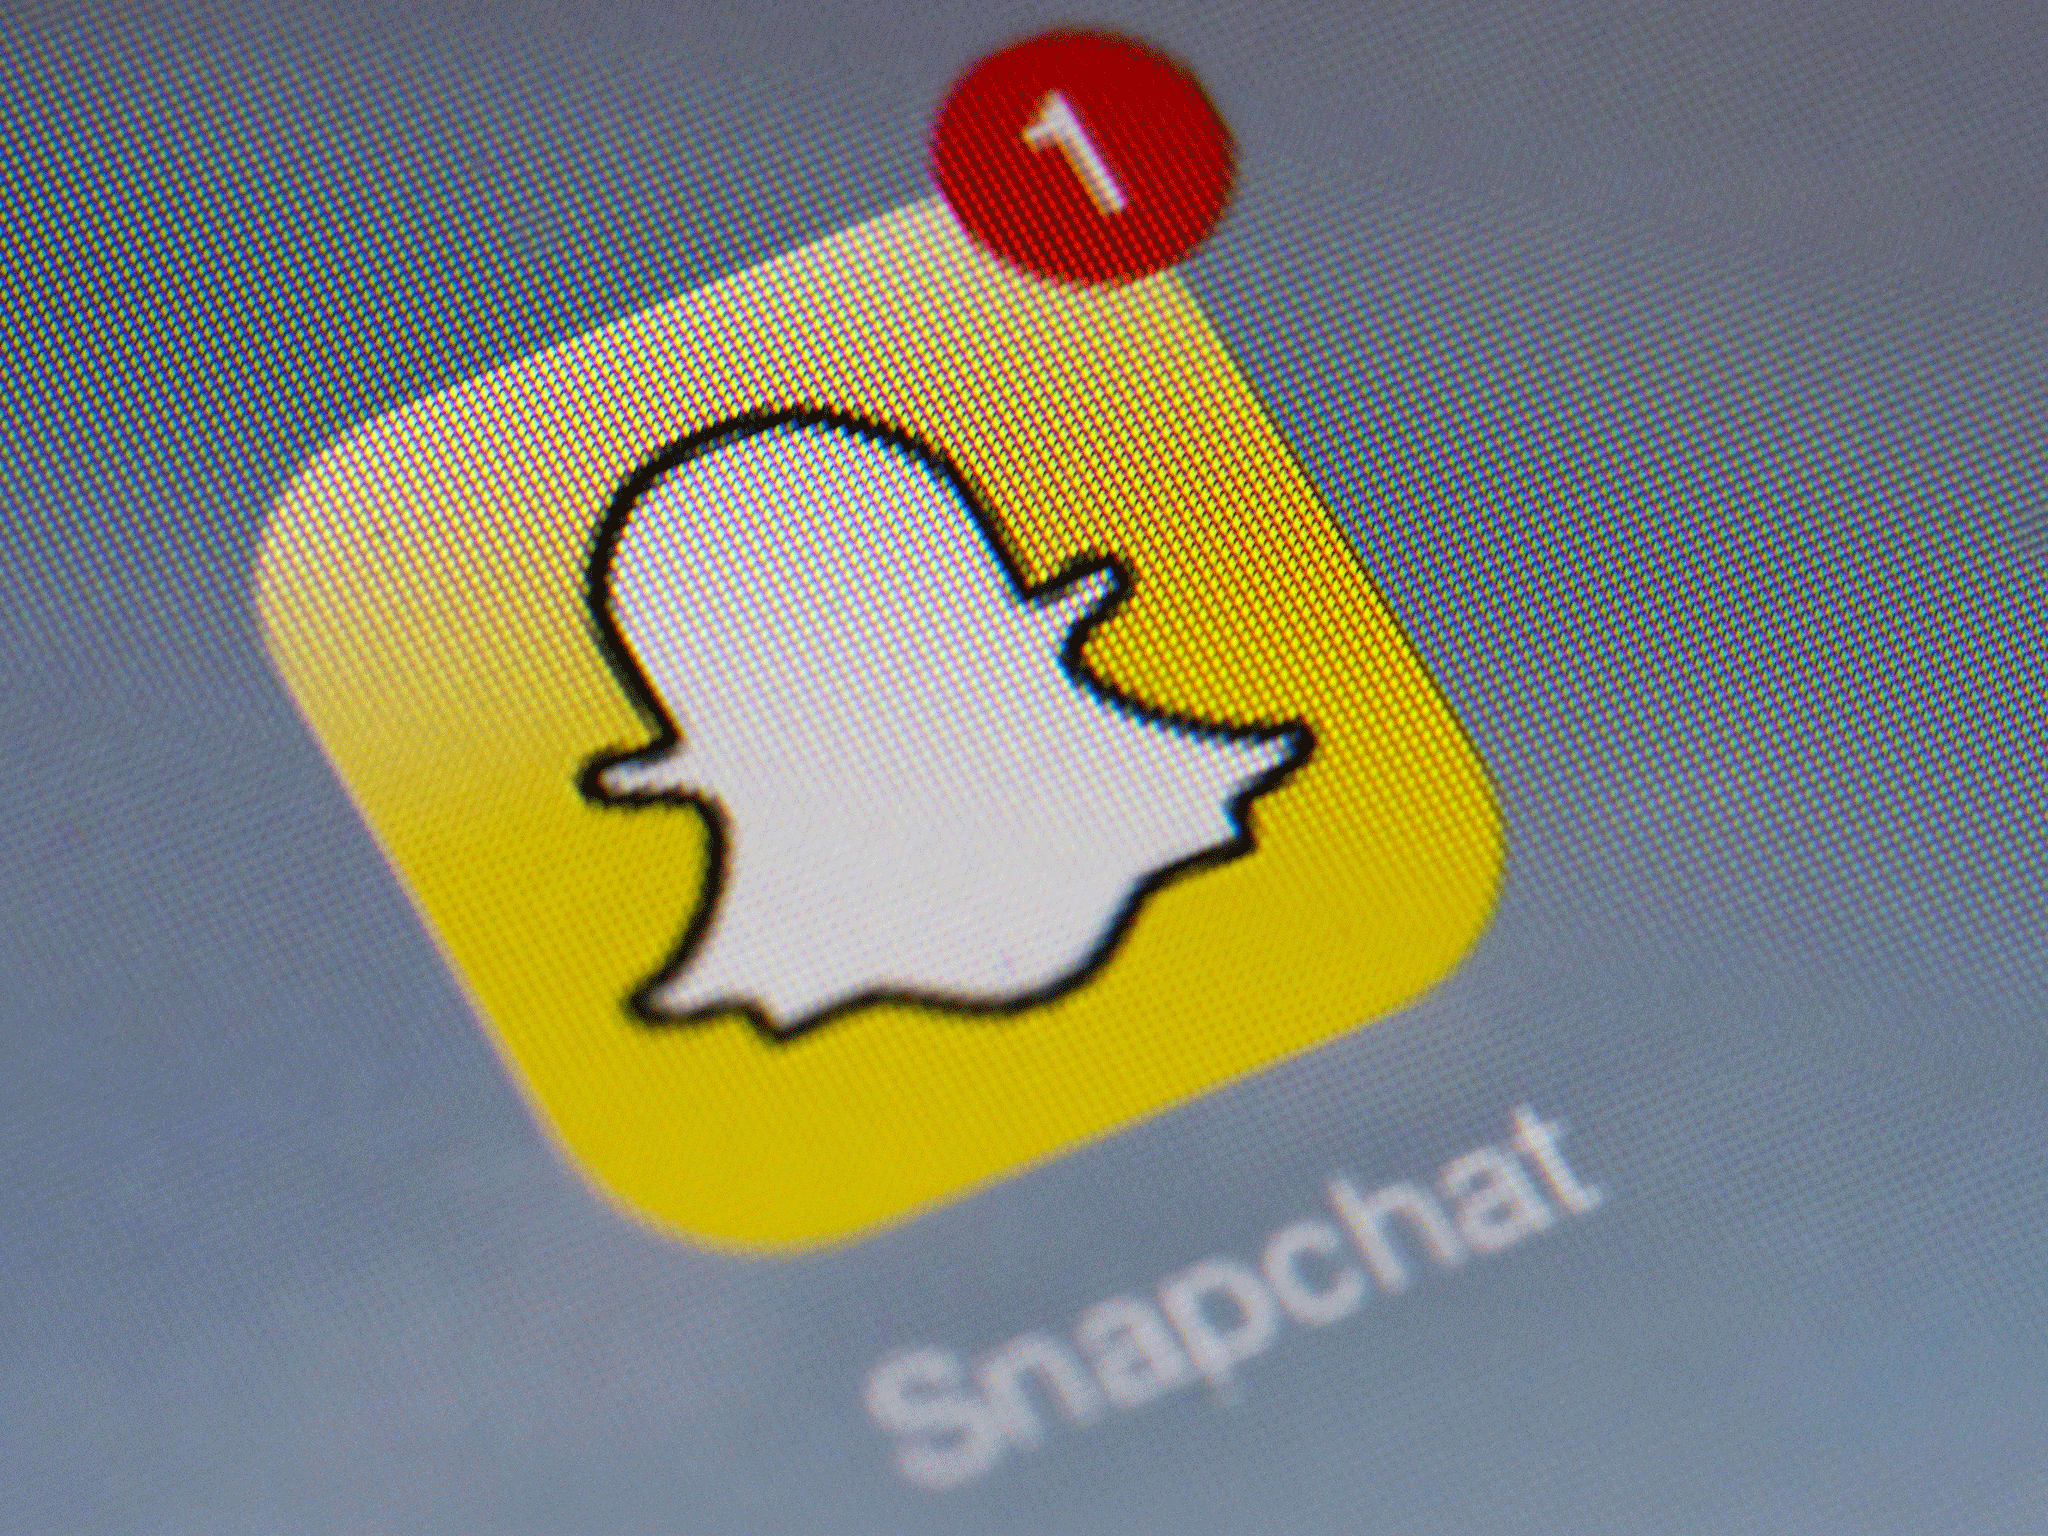 Woman shoots herself while Snapchatting 